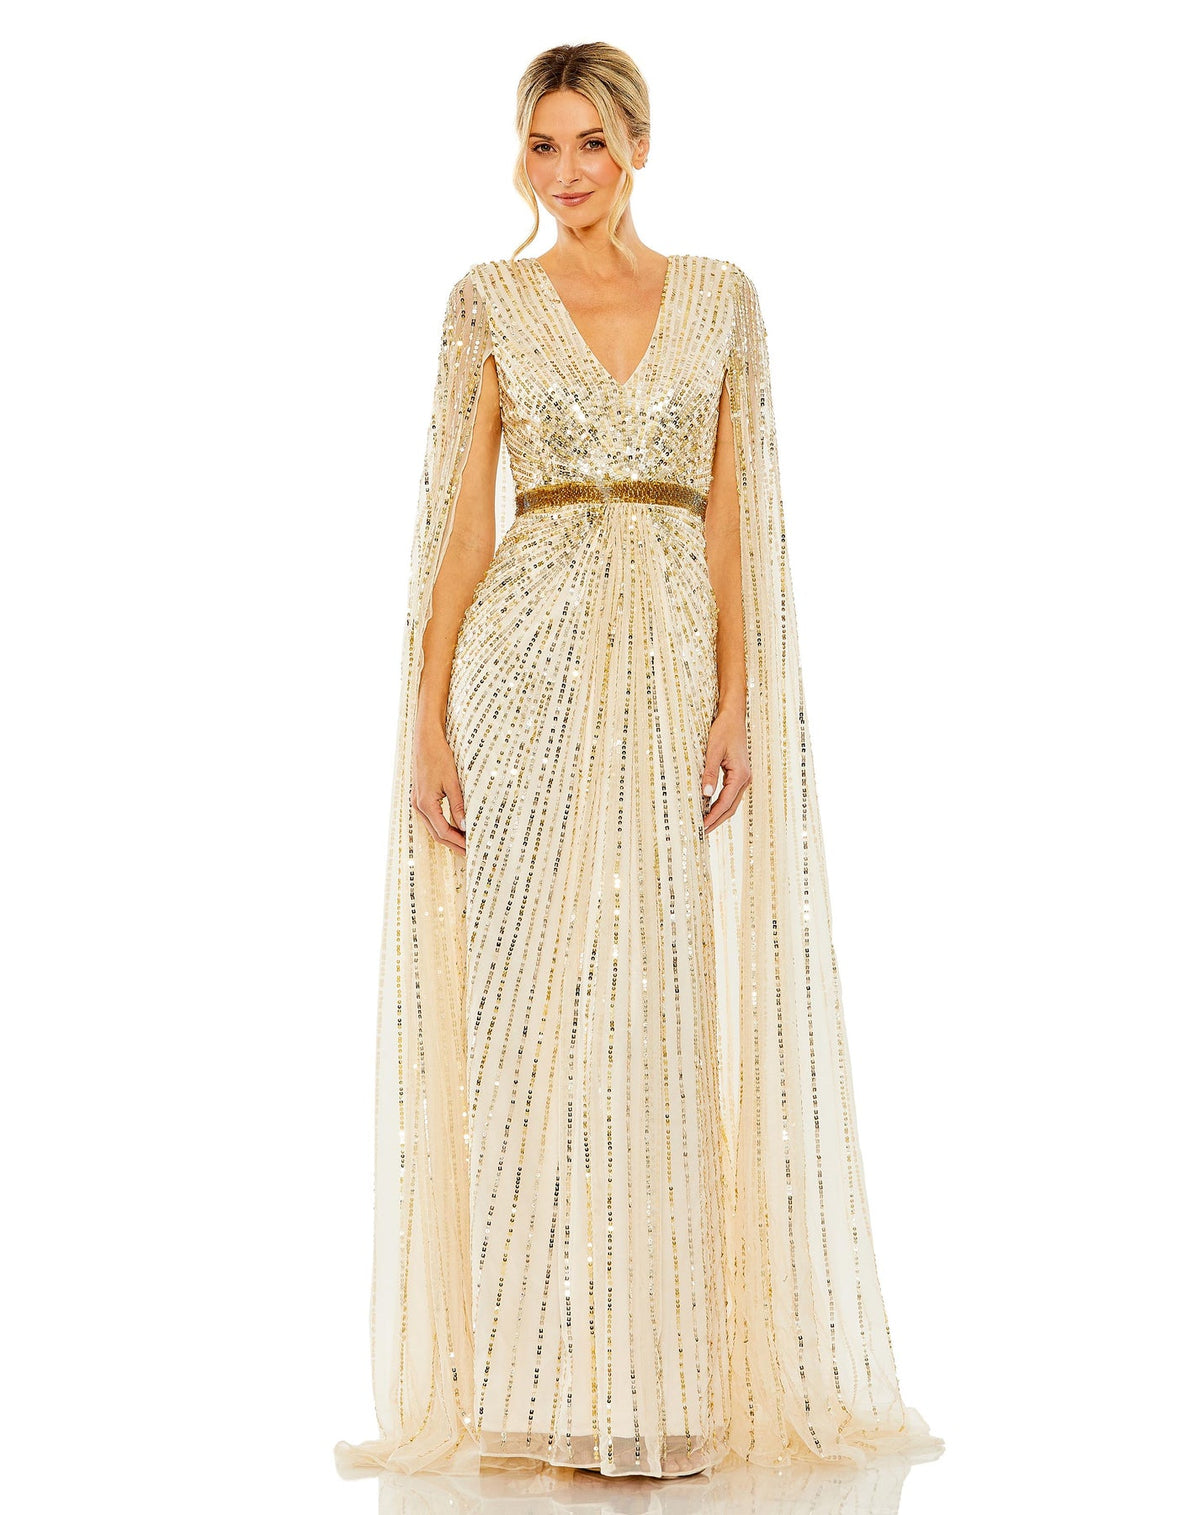 Kate Middleton dress MAC DUGGAL, SEQUINED V-NECK GOWN WITH CAPE SLEEVES, Style #5803, NUDE